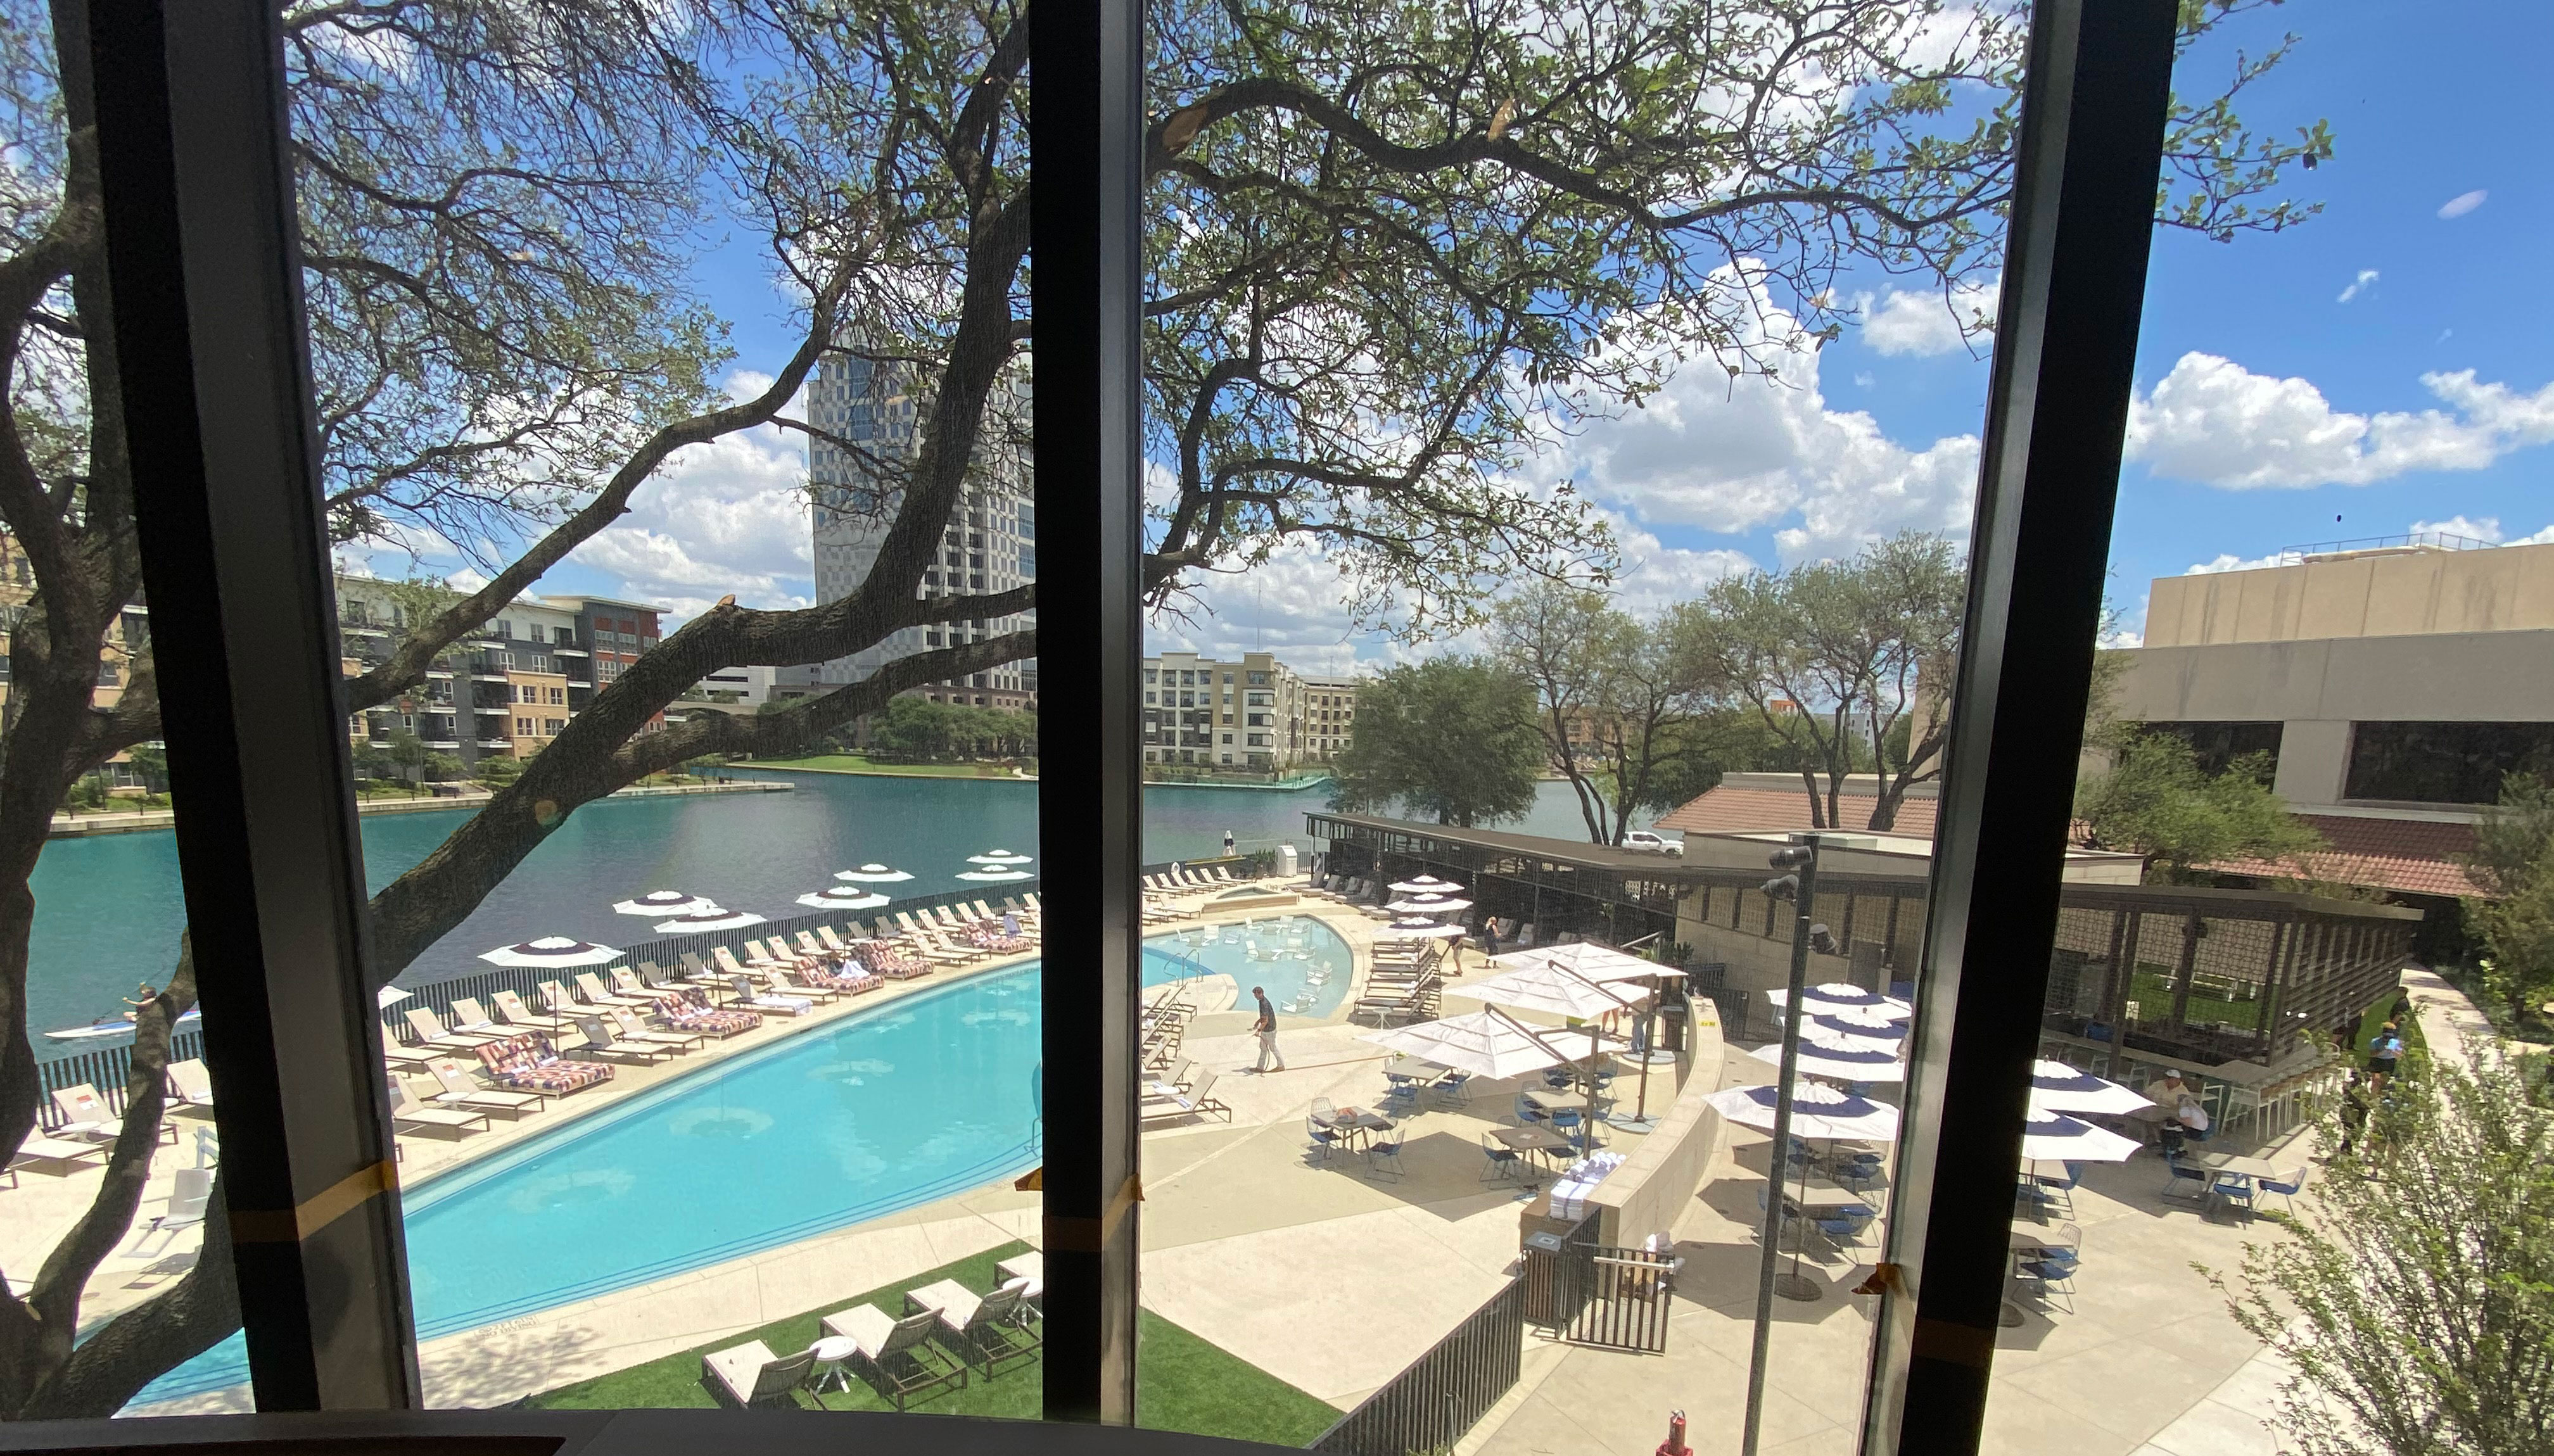 Free Download Las Colinas Convention Center For Windows 7